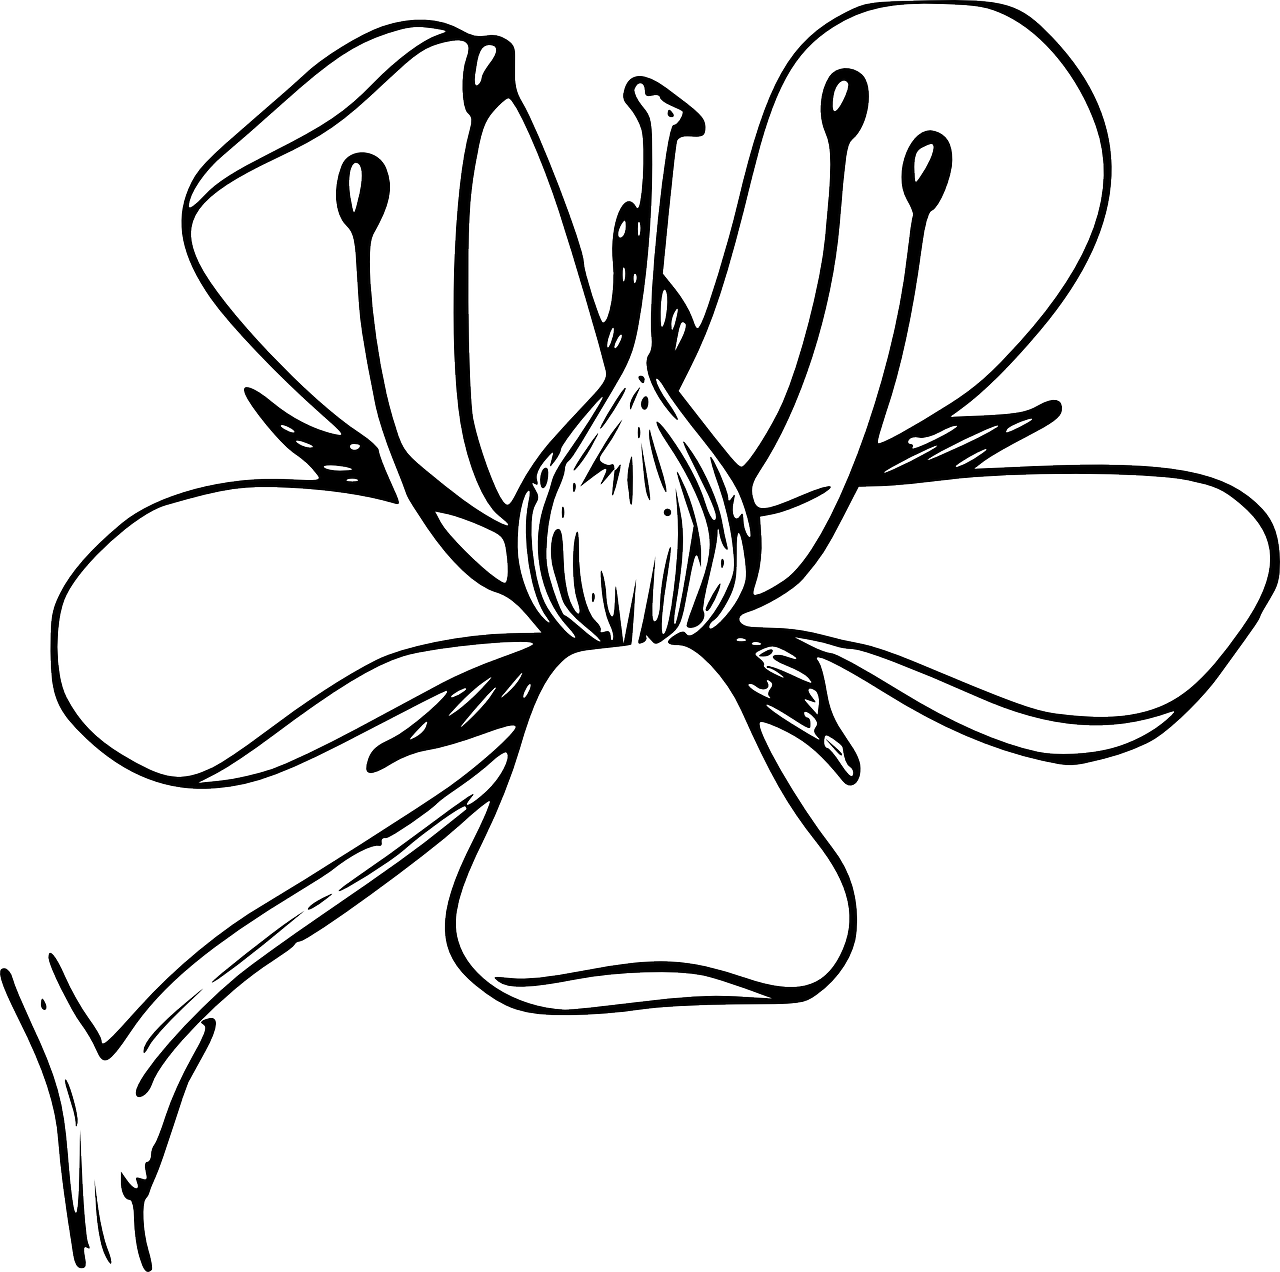 Wildflowers drawing - coloring pages free for kids 8